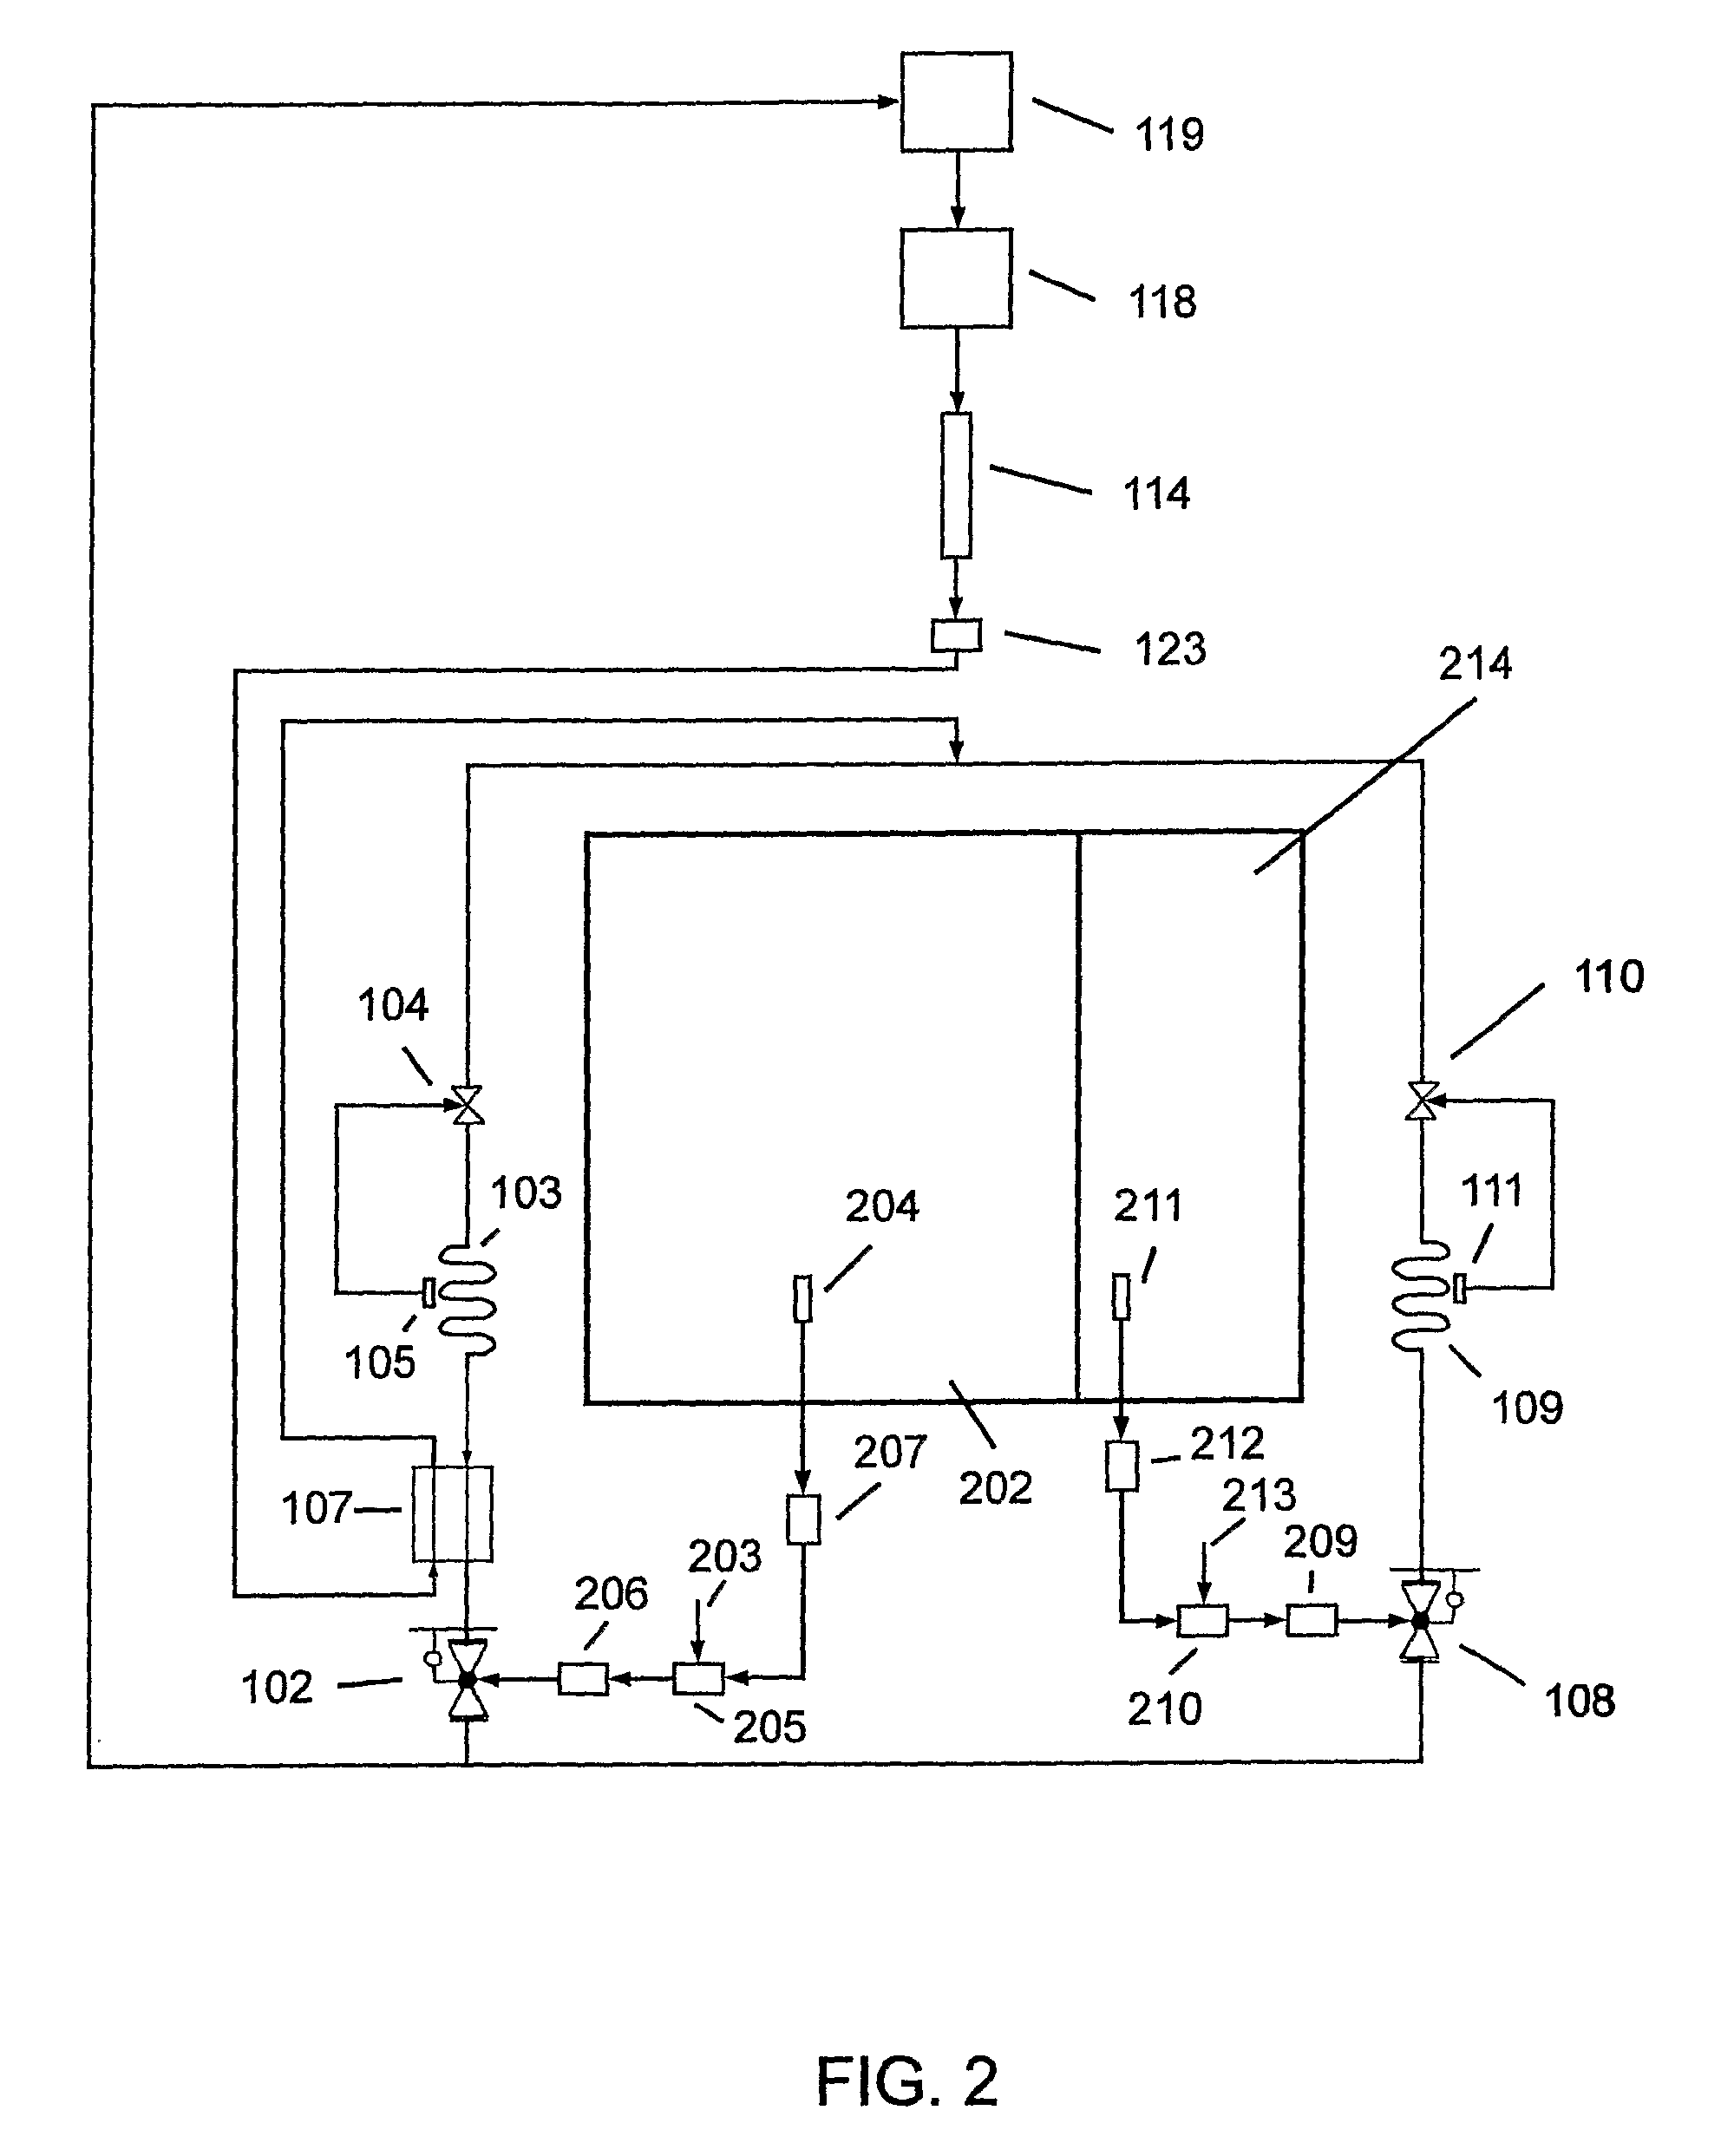 Method for controlling temperature in multiple compartments for refrigerated transport